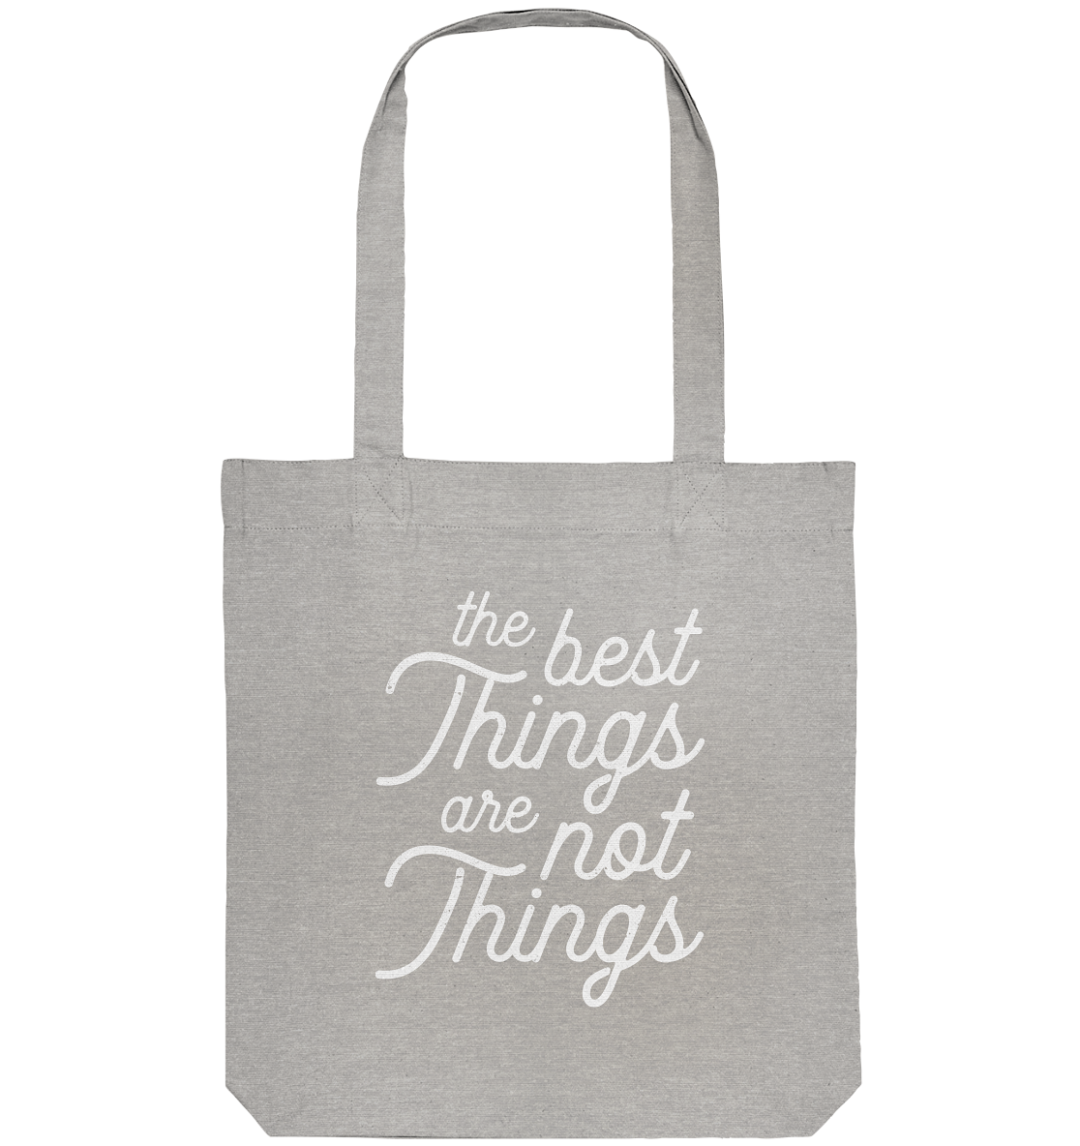 front organic tote bag c2c1c0 1116x 5 The best Things are Not Things - Organic Tote-Bag